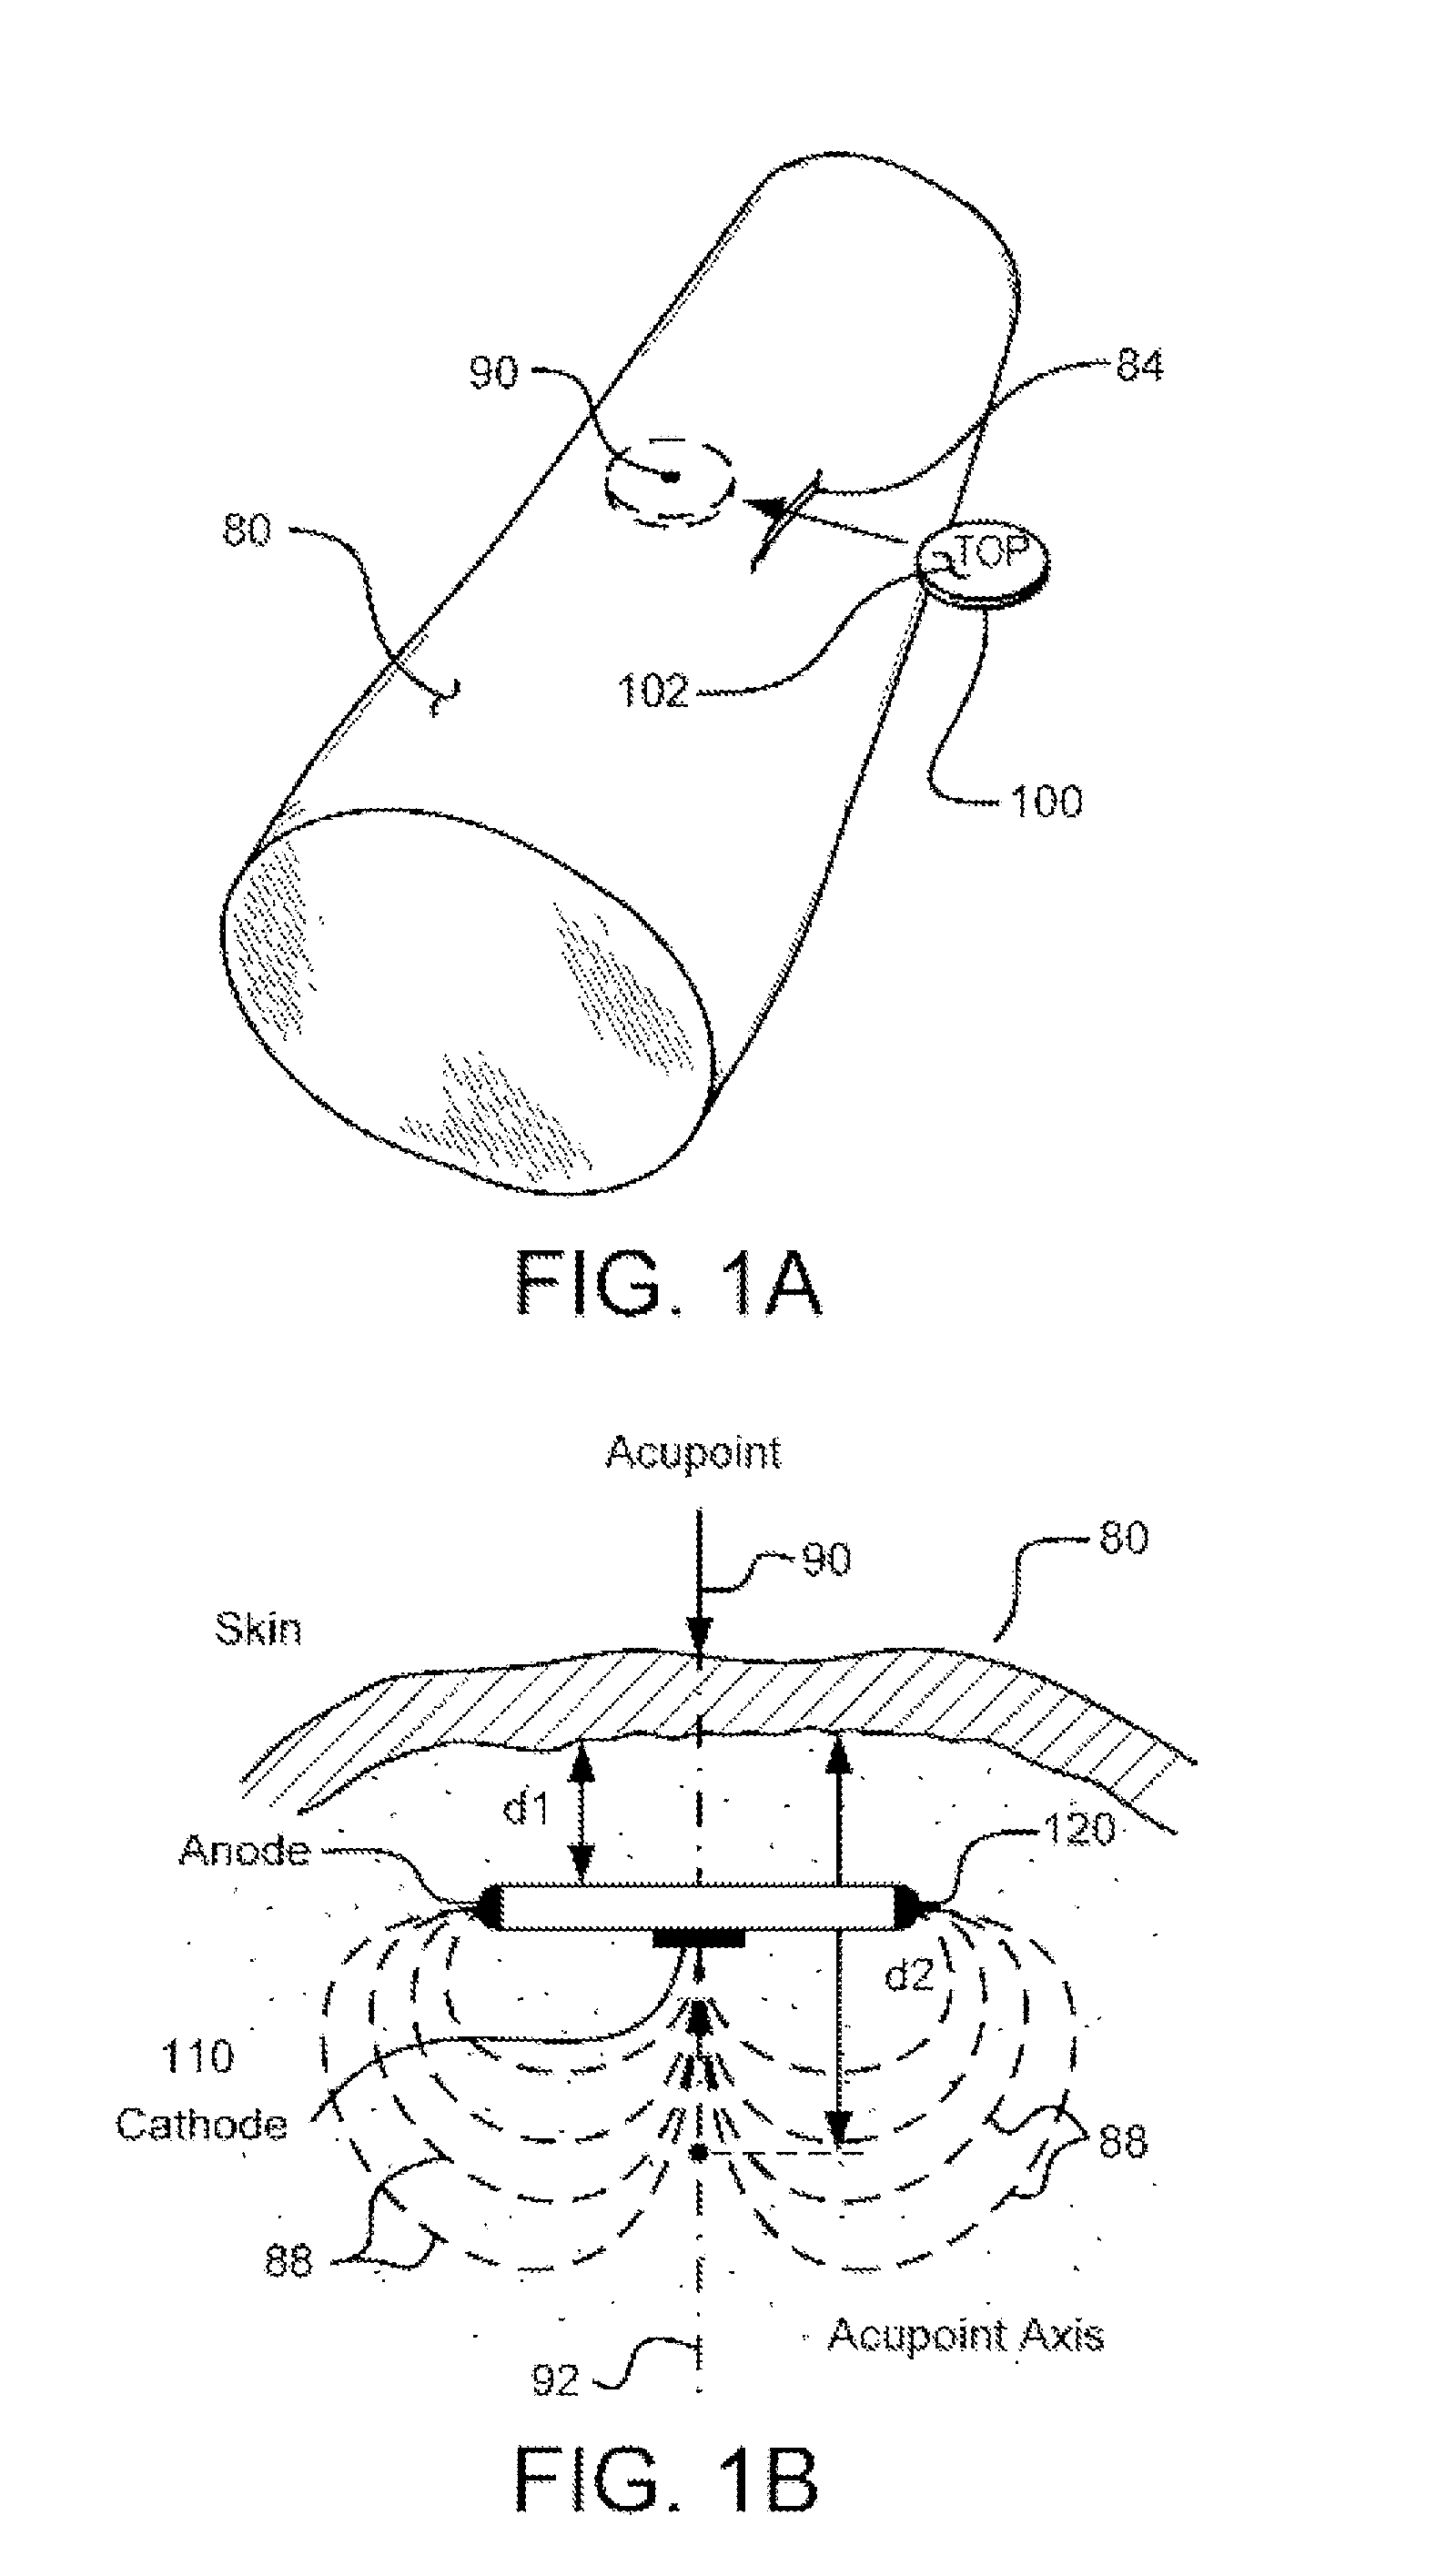 Circuits and Methods for Using a High Impedance, Thin, Coin-Cell Type Battery in an Implantable Electroacupuncture Device